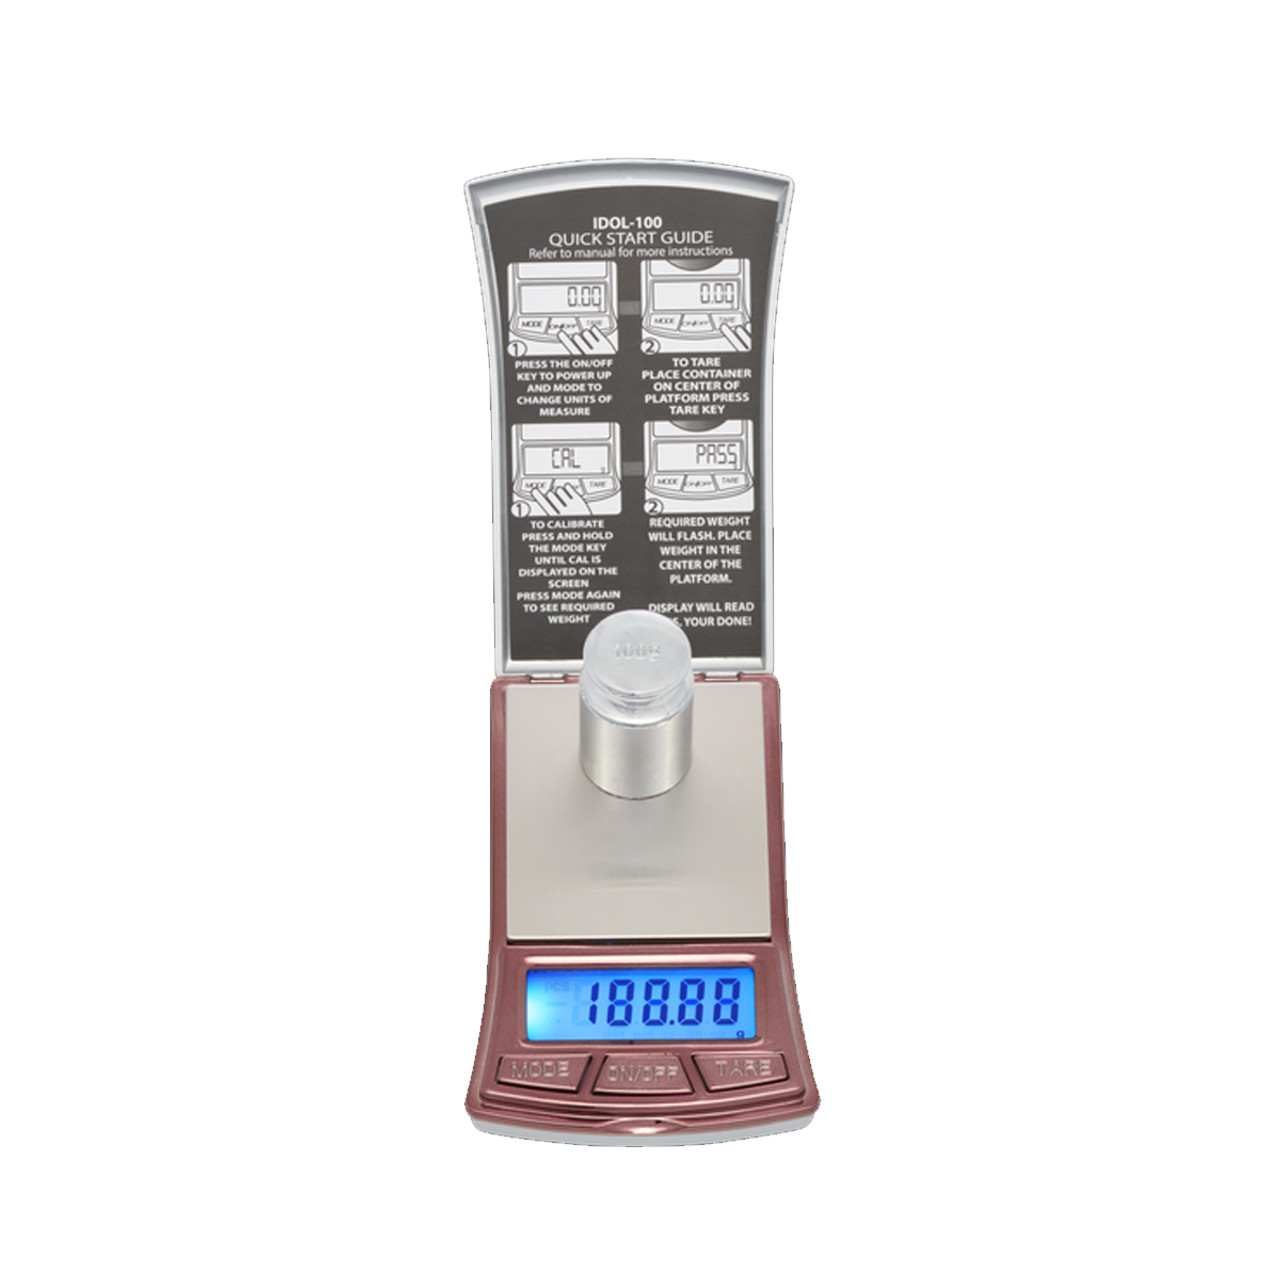 Series Digital Pocket Weight Scale, Stainless-Steel Backlit LCD 100g x 0.01g, (Black), AWS-100-Black - American Weigh Scales